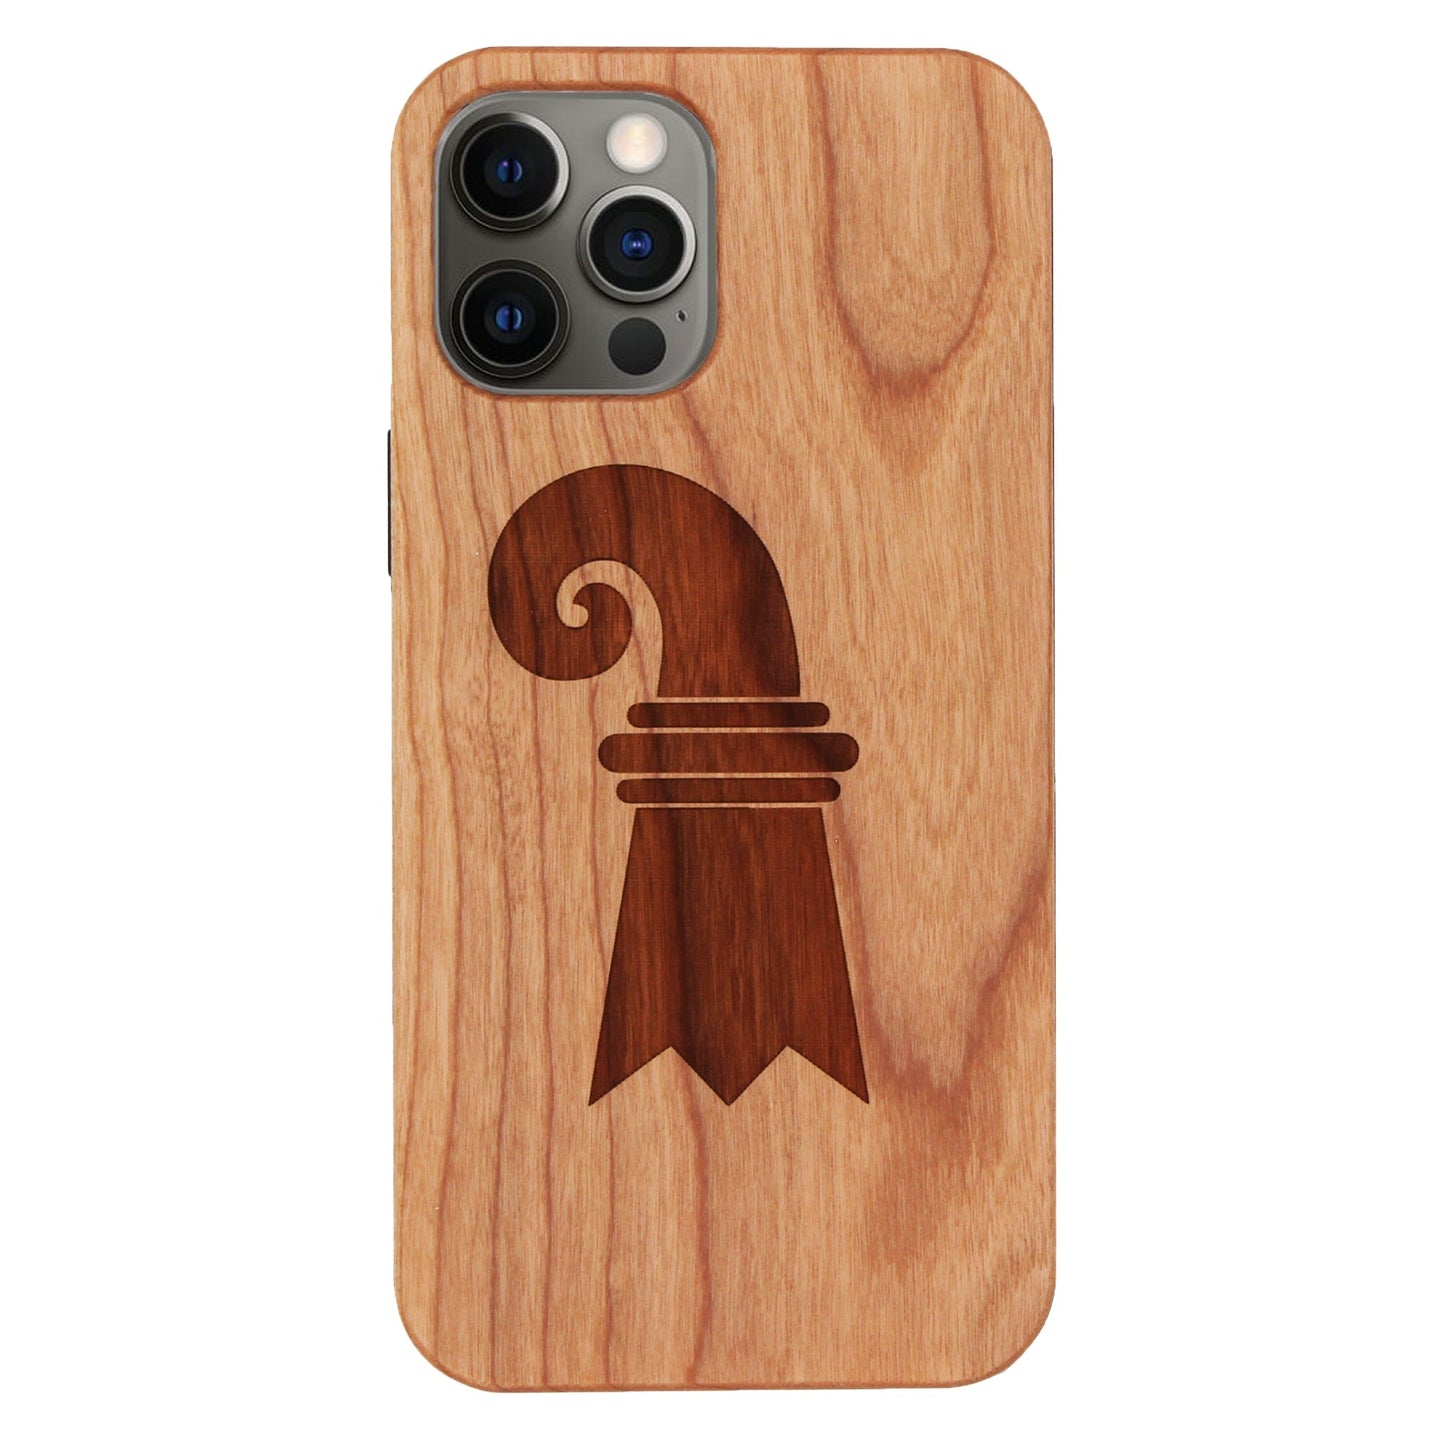 Baslerstab Eden case made of cherry wood for iPhone 12/12 Pro 